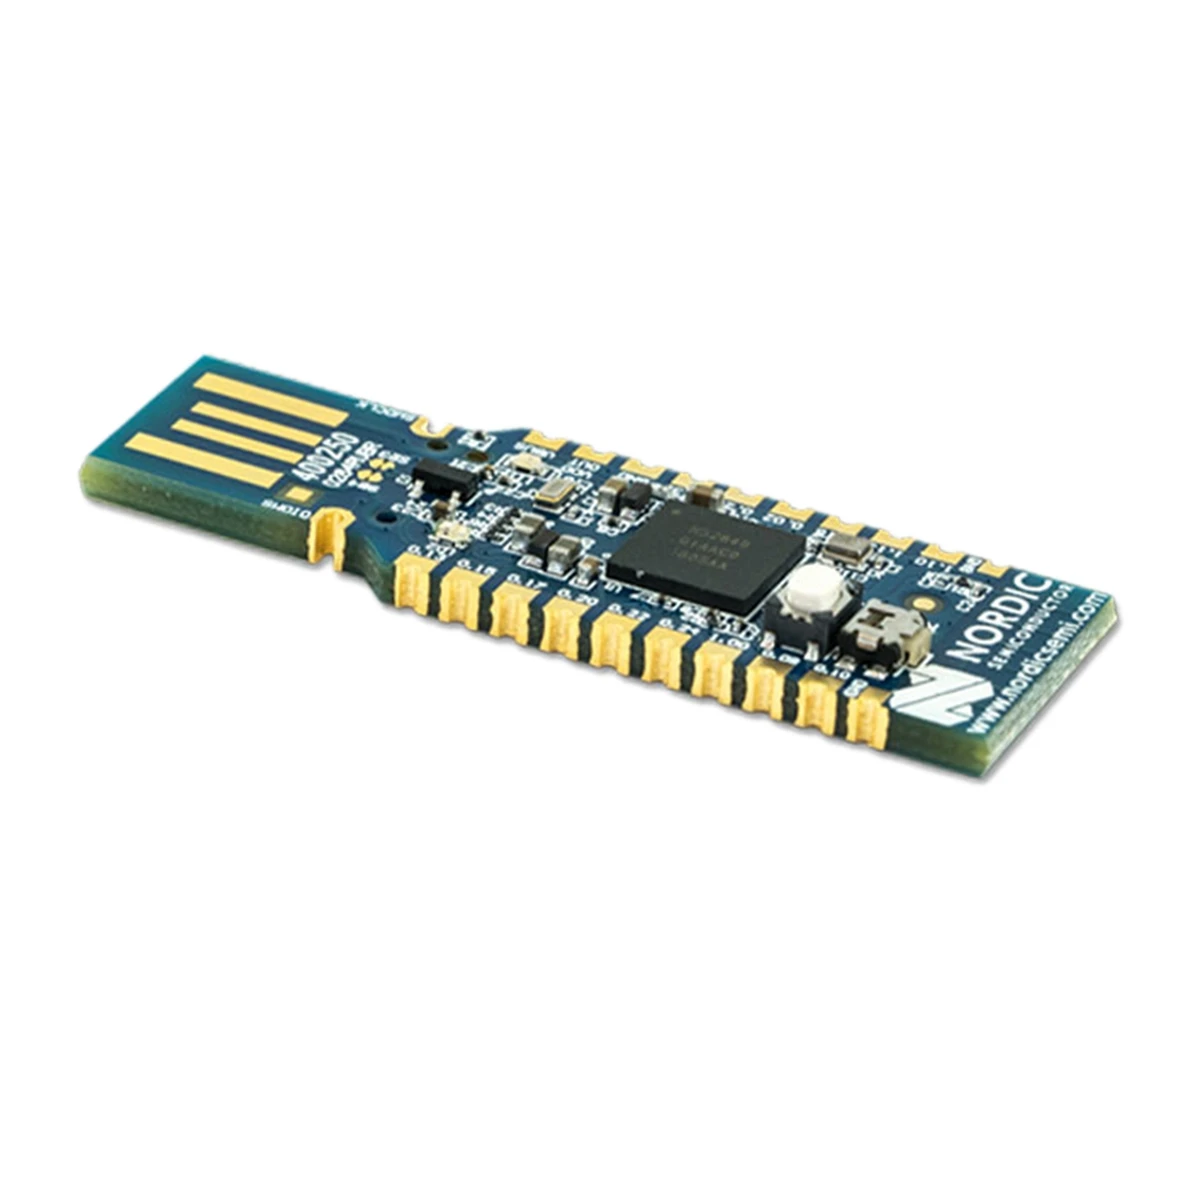 

Nordic NRF52840-Dongle USB Dongle for Eval Bluetooth Development Module